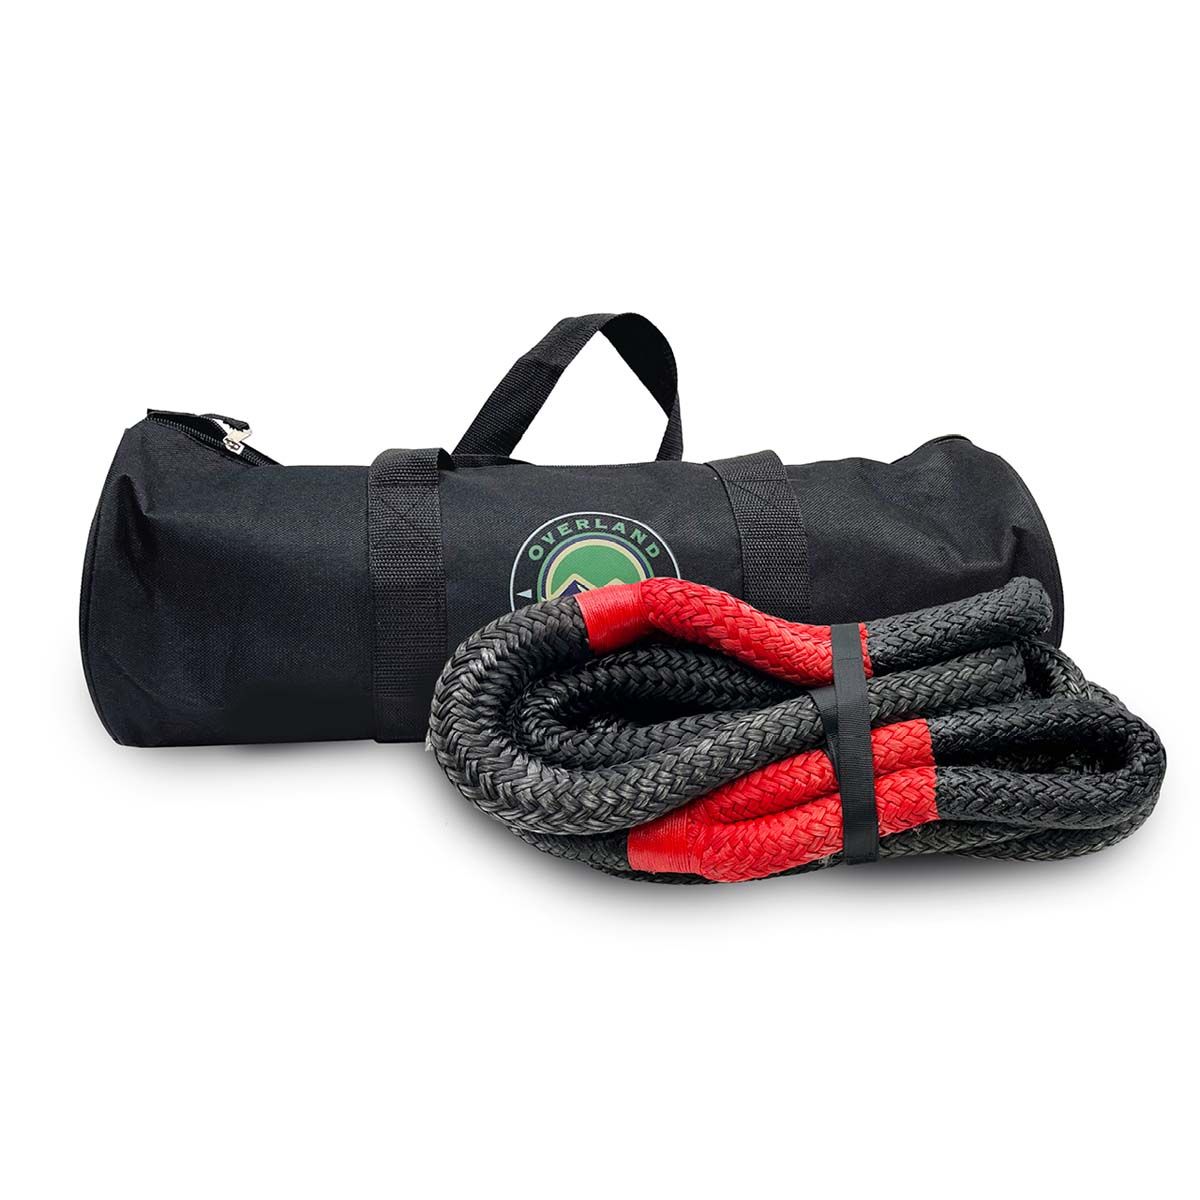 OVS Brute Kinetic Recovery Rope 1 1/2" x 30' With Storage Bag 19009922